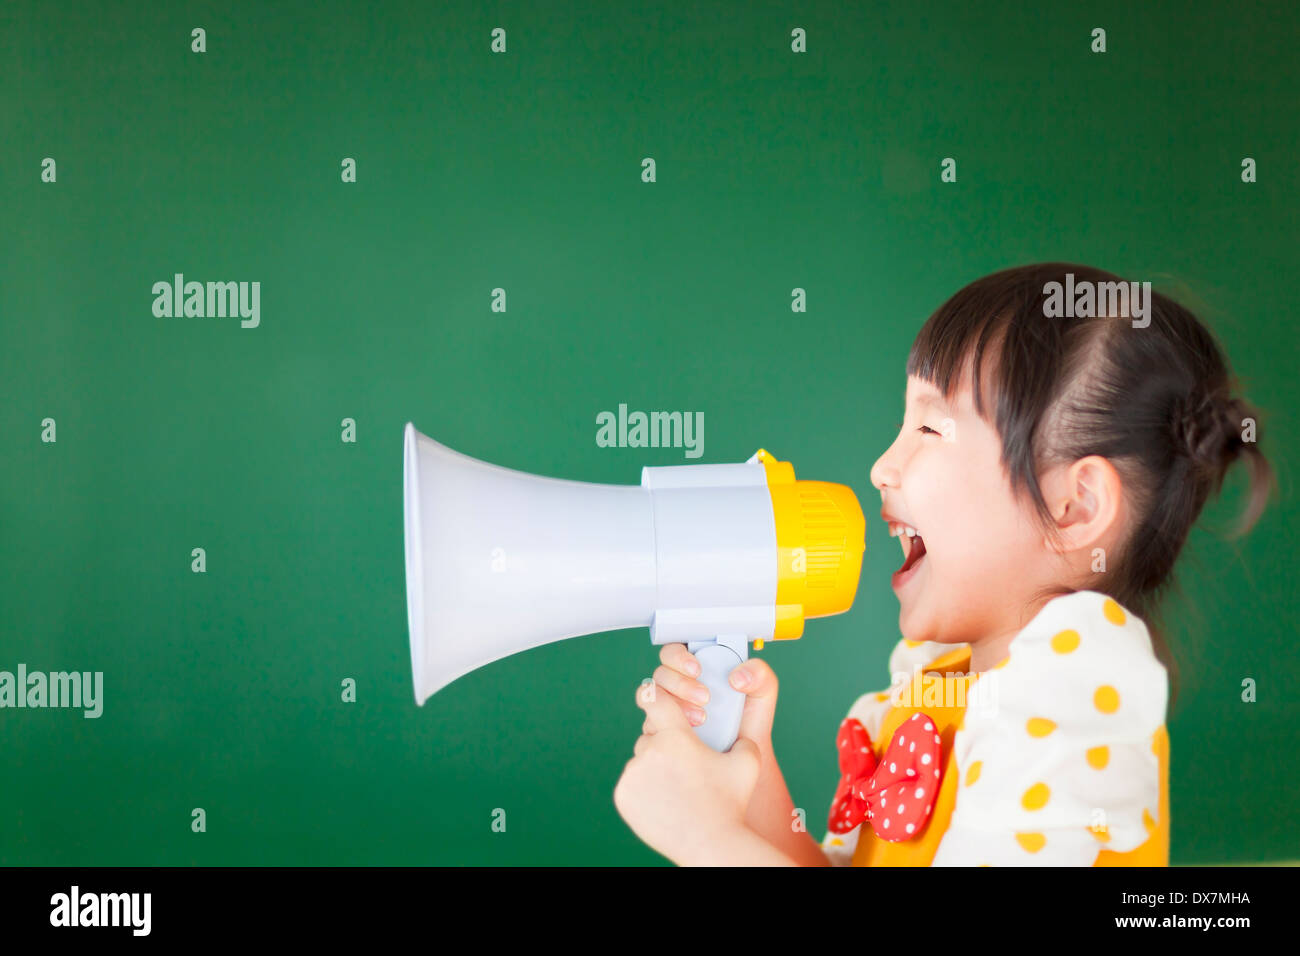 happy kid shouts something into the megaphone with board Stock Photo